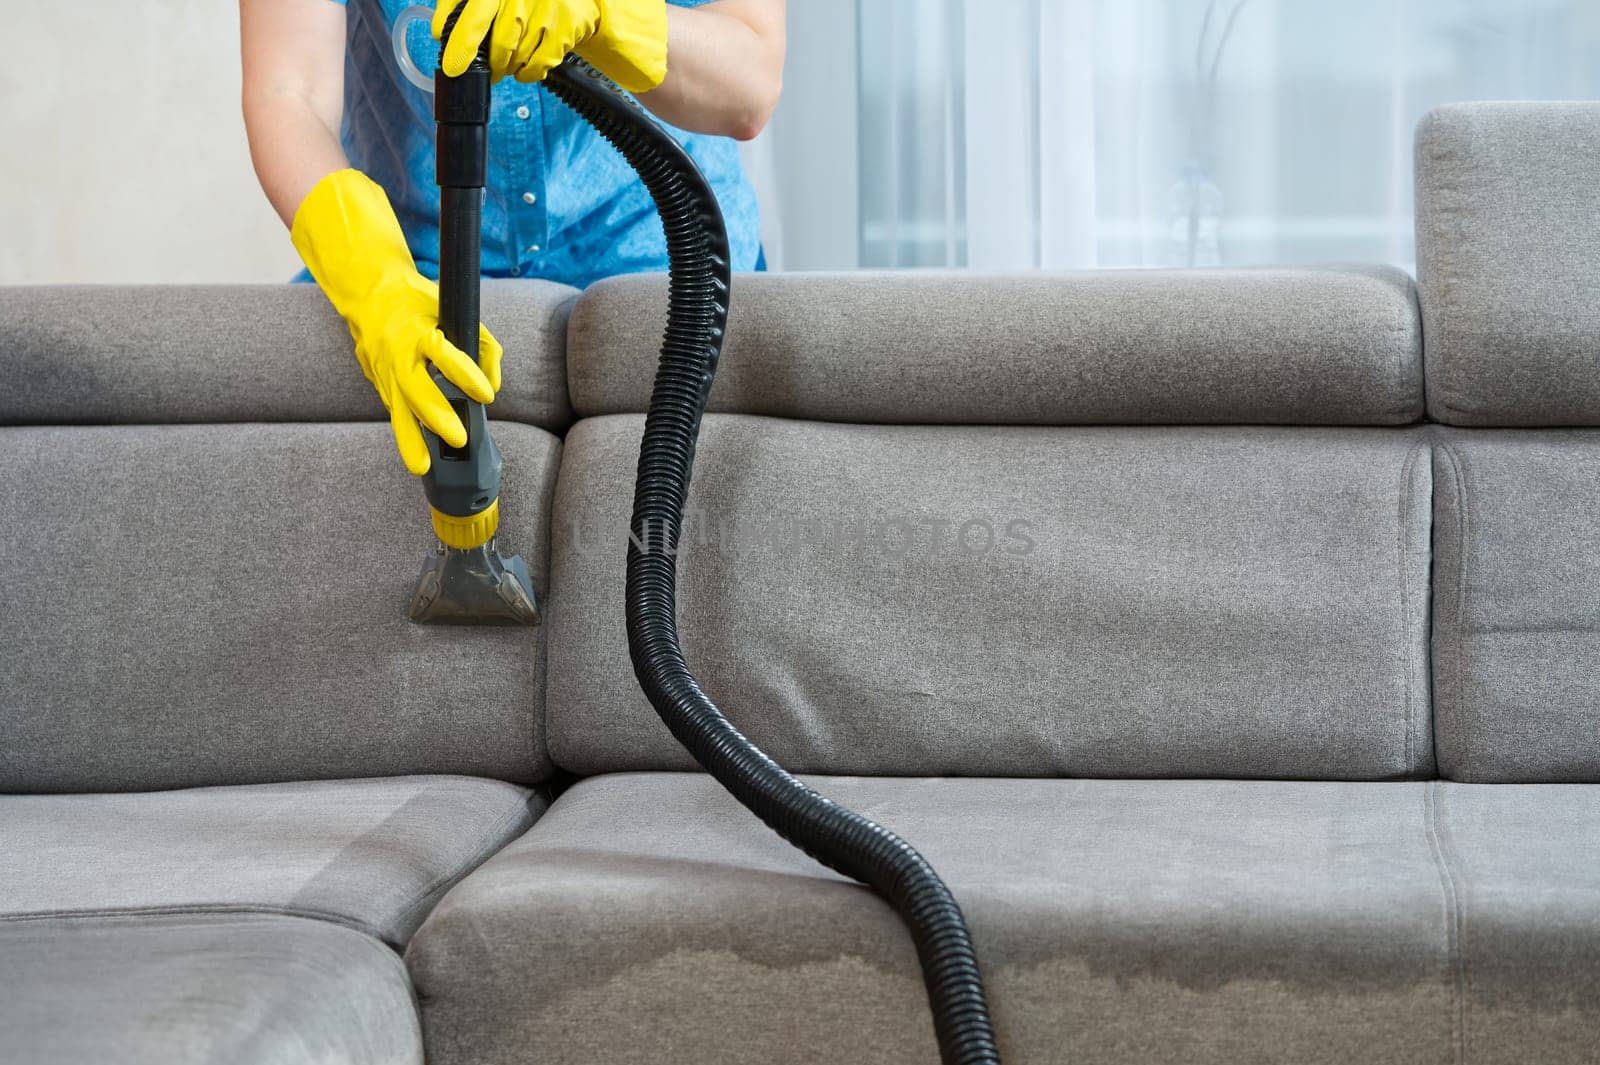 Sofa chemical cleaning with professionally extraction method. Wet textile sofa cleaning by PhotoTime